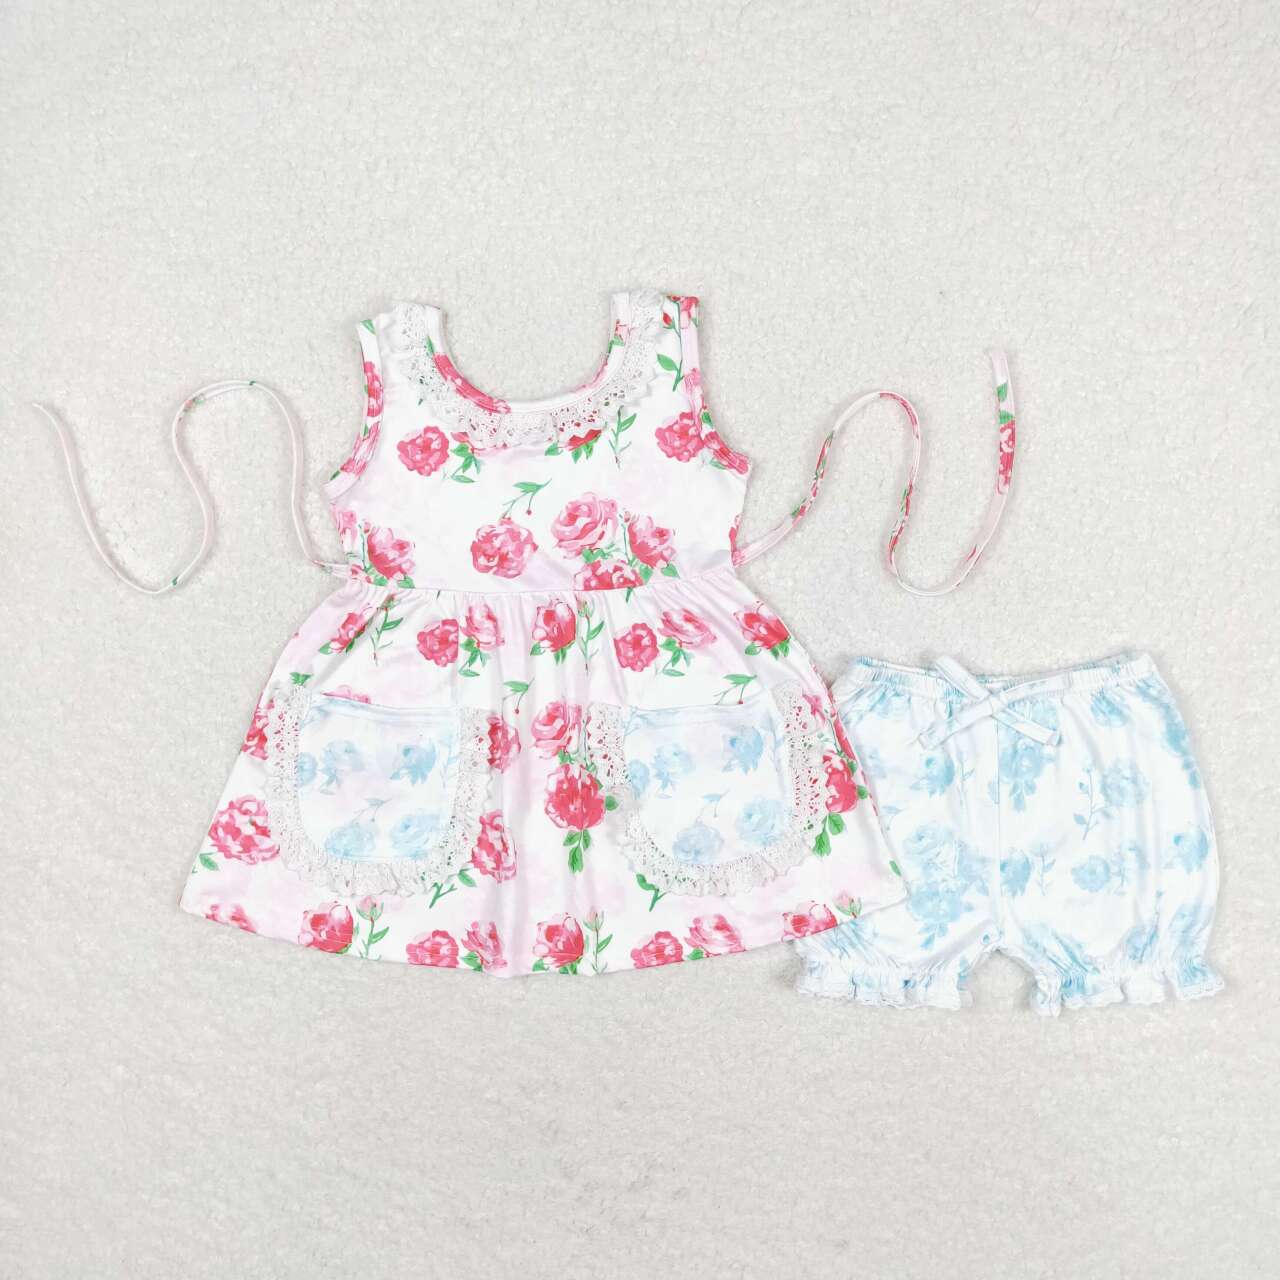 Flowers Print Pockets Girls Summer Clothes Set Sisters Wear